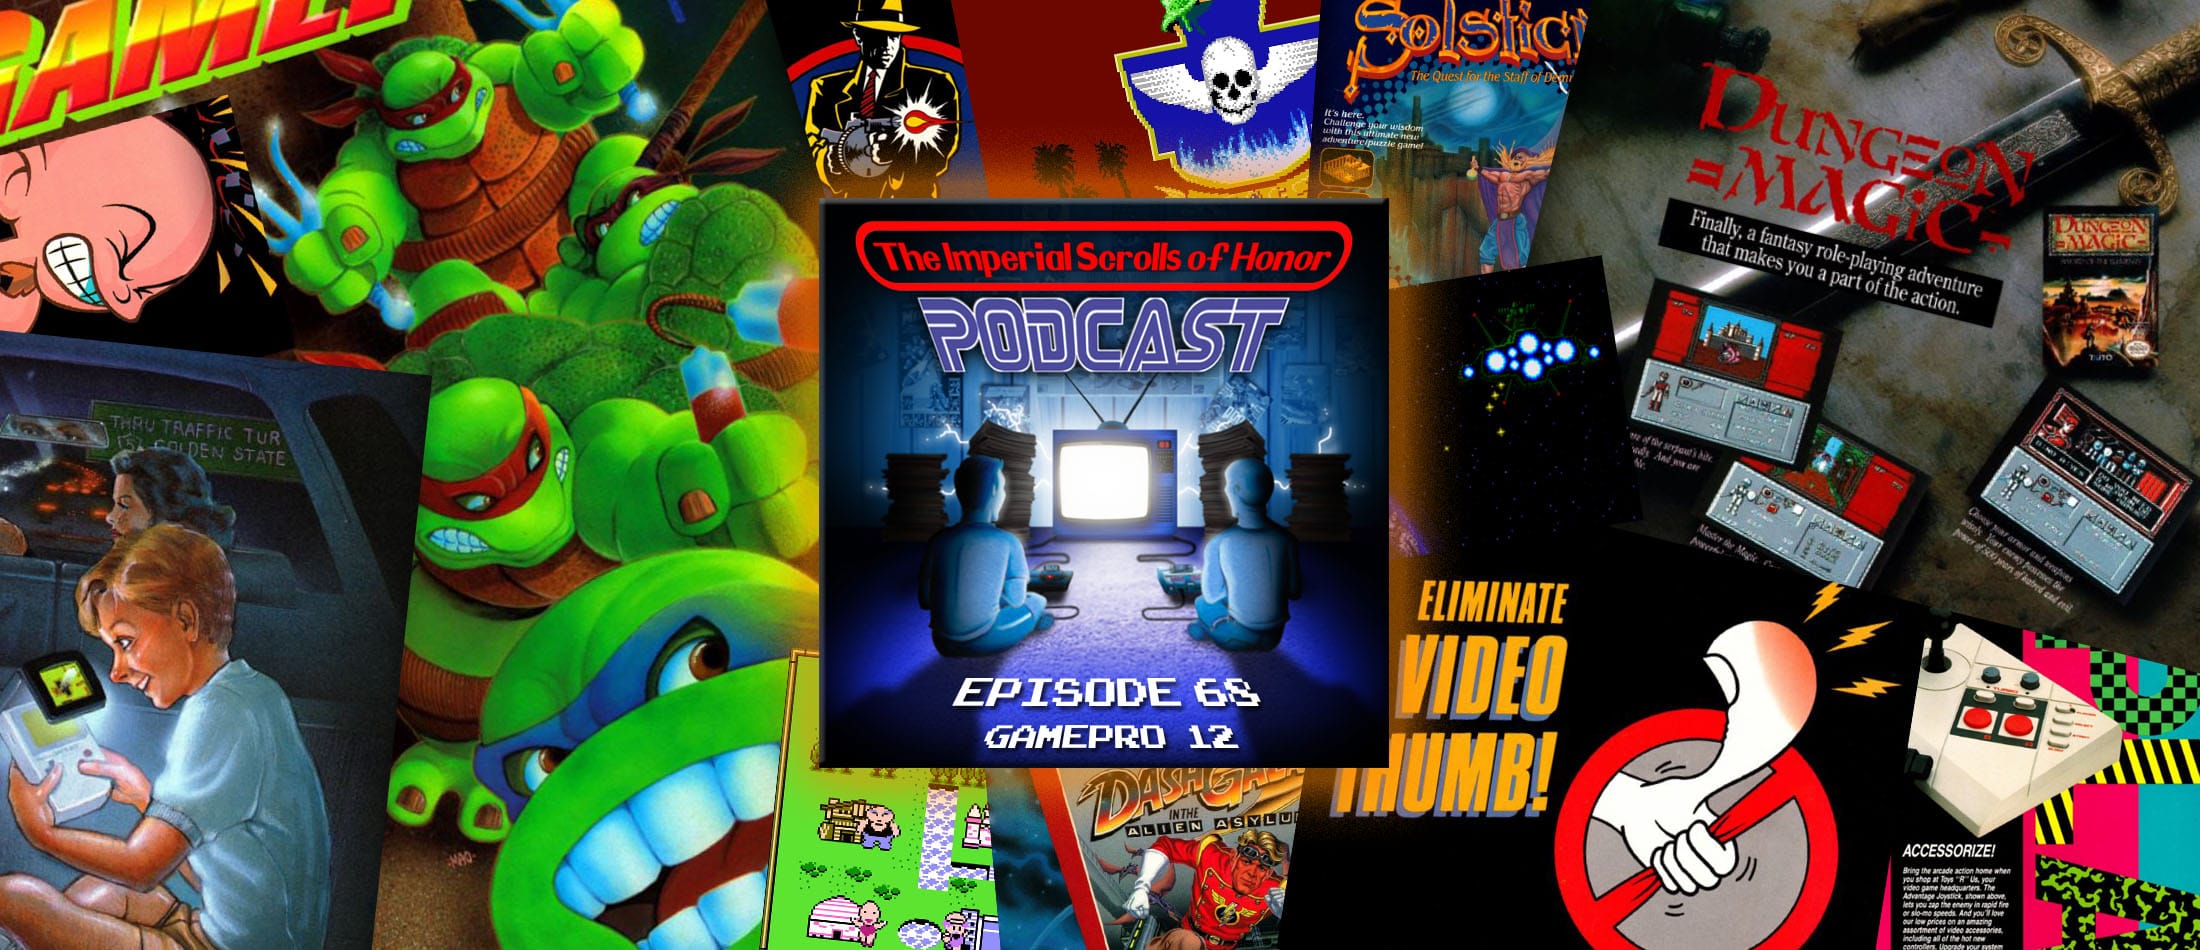 The Imperial Scrolls of Honor Podcast - Ep 68 - GamePro #12